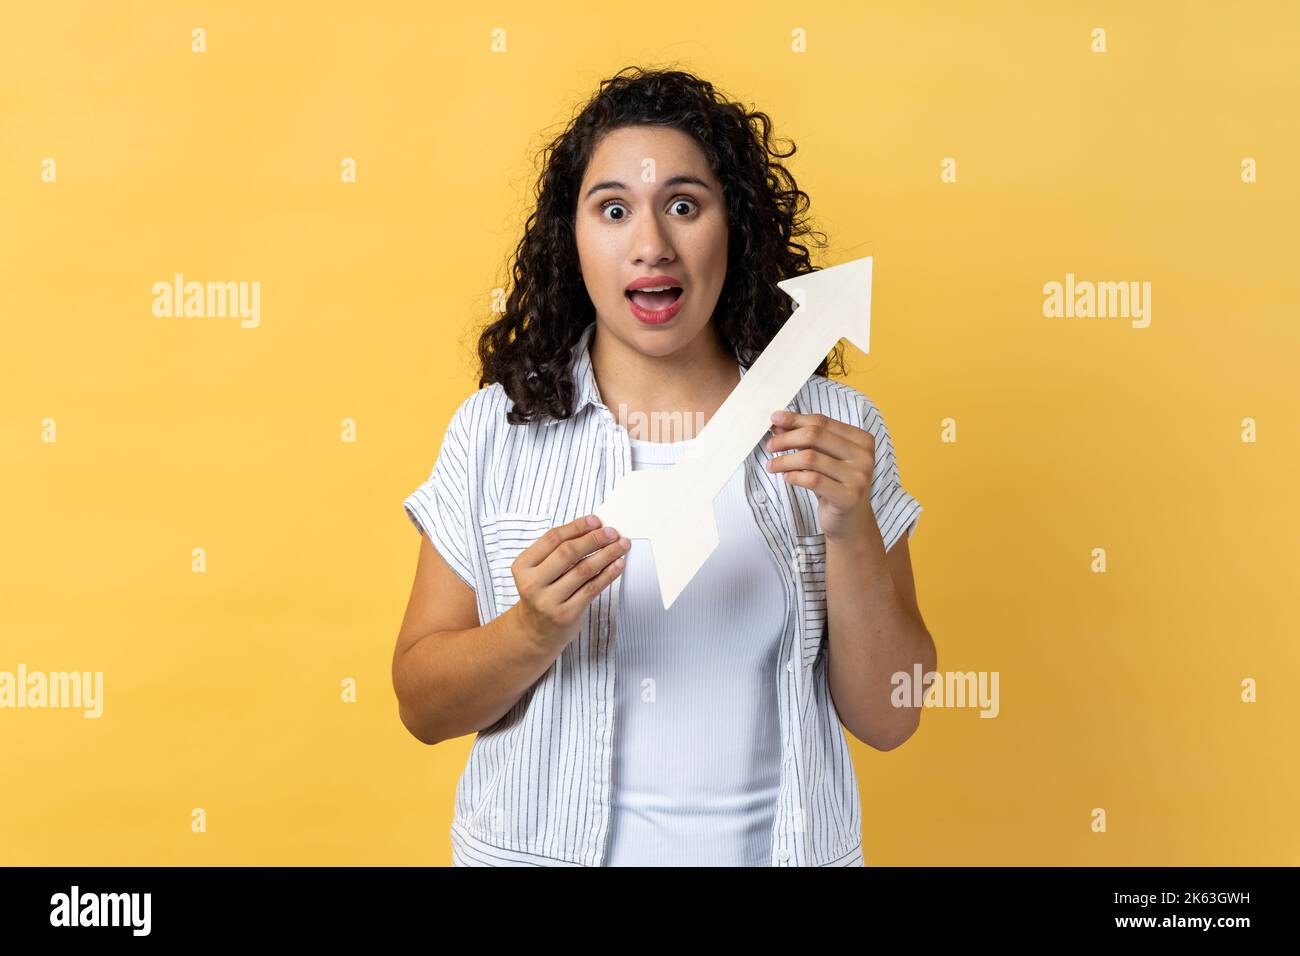 Portrait of amazed excited woman with dark wavy hair standing holding white arrow pointing aside, looking at camera with open mouth. Indoor studio shot isolated on yellow background. Stock Photo